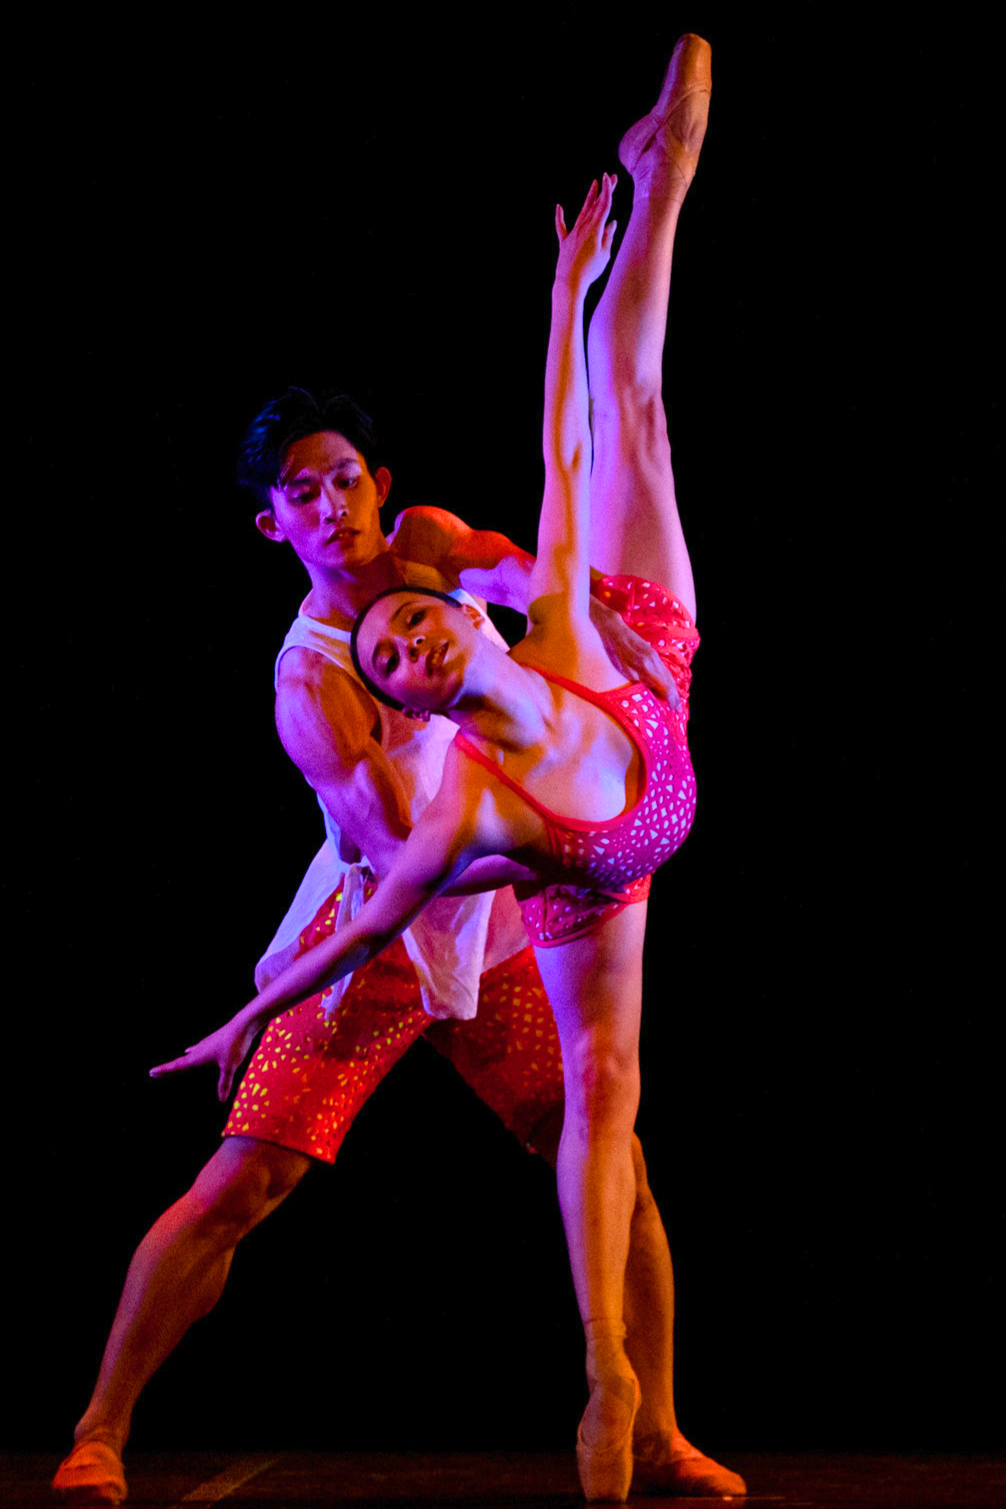 Lawrence supporting Jasmine as she lifts her leg high facing the front.